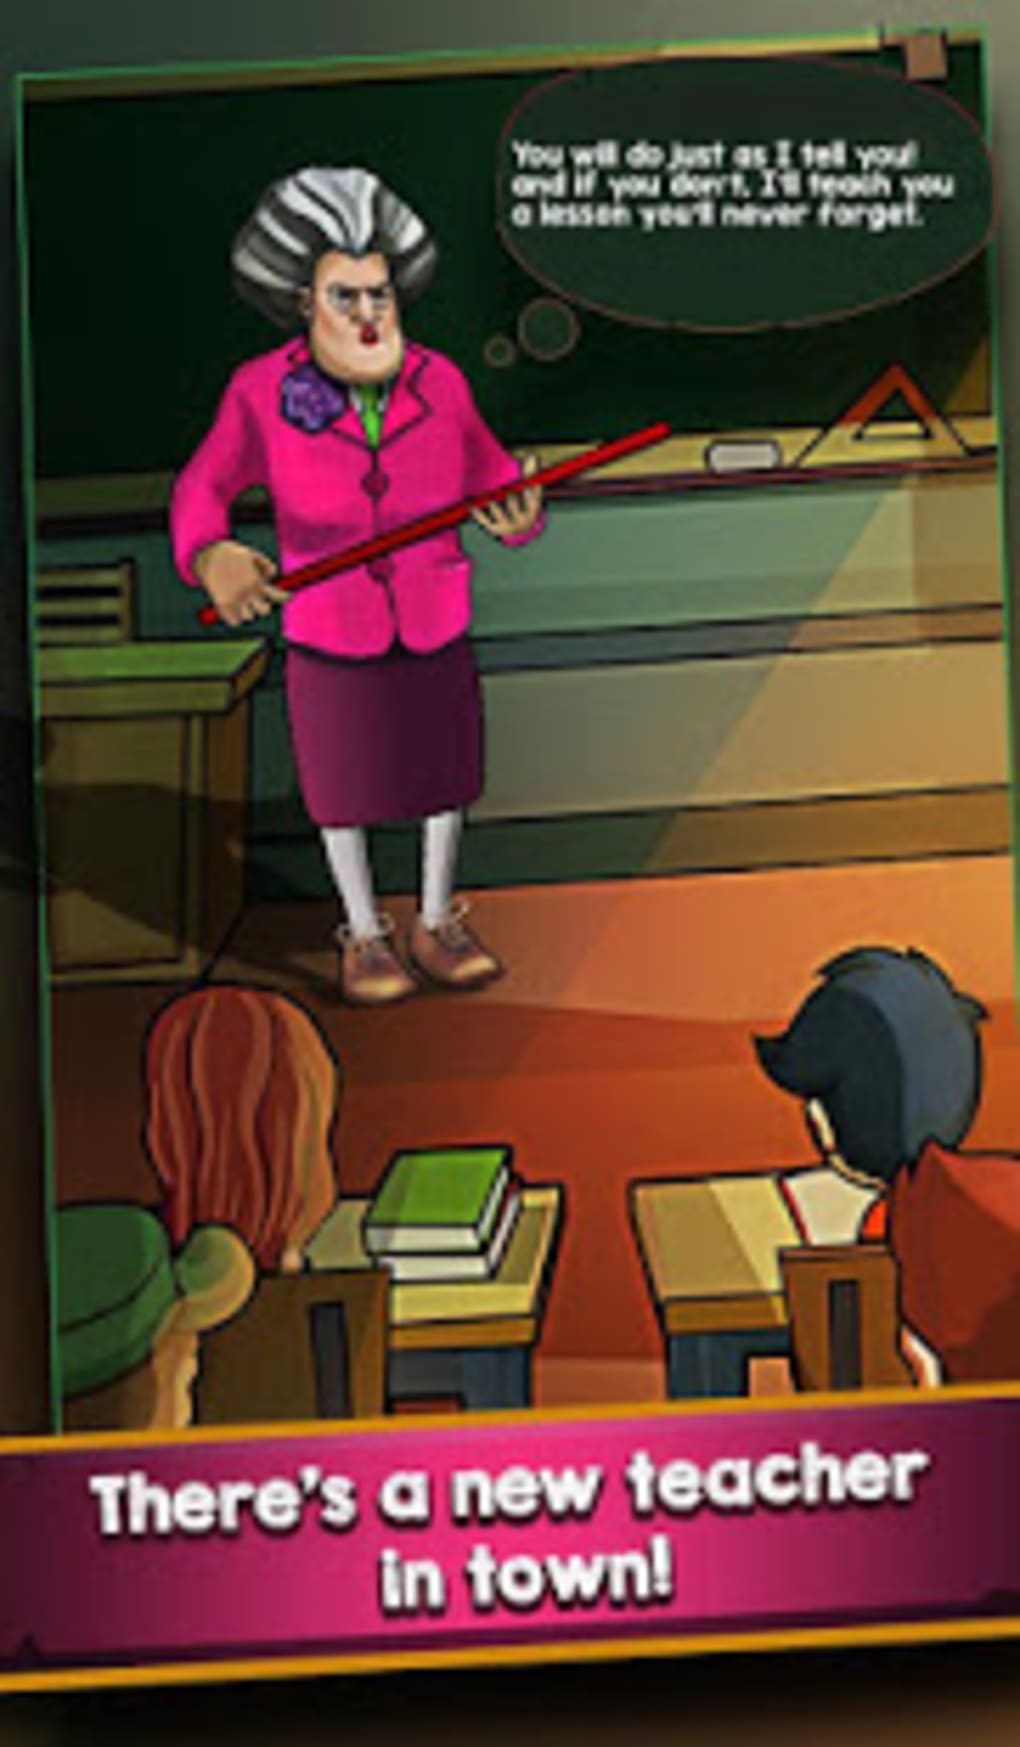 Download do APK de New Scary Teacher 3D Chapter 5 Tips para Android